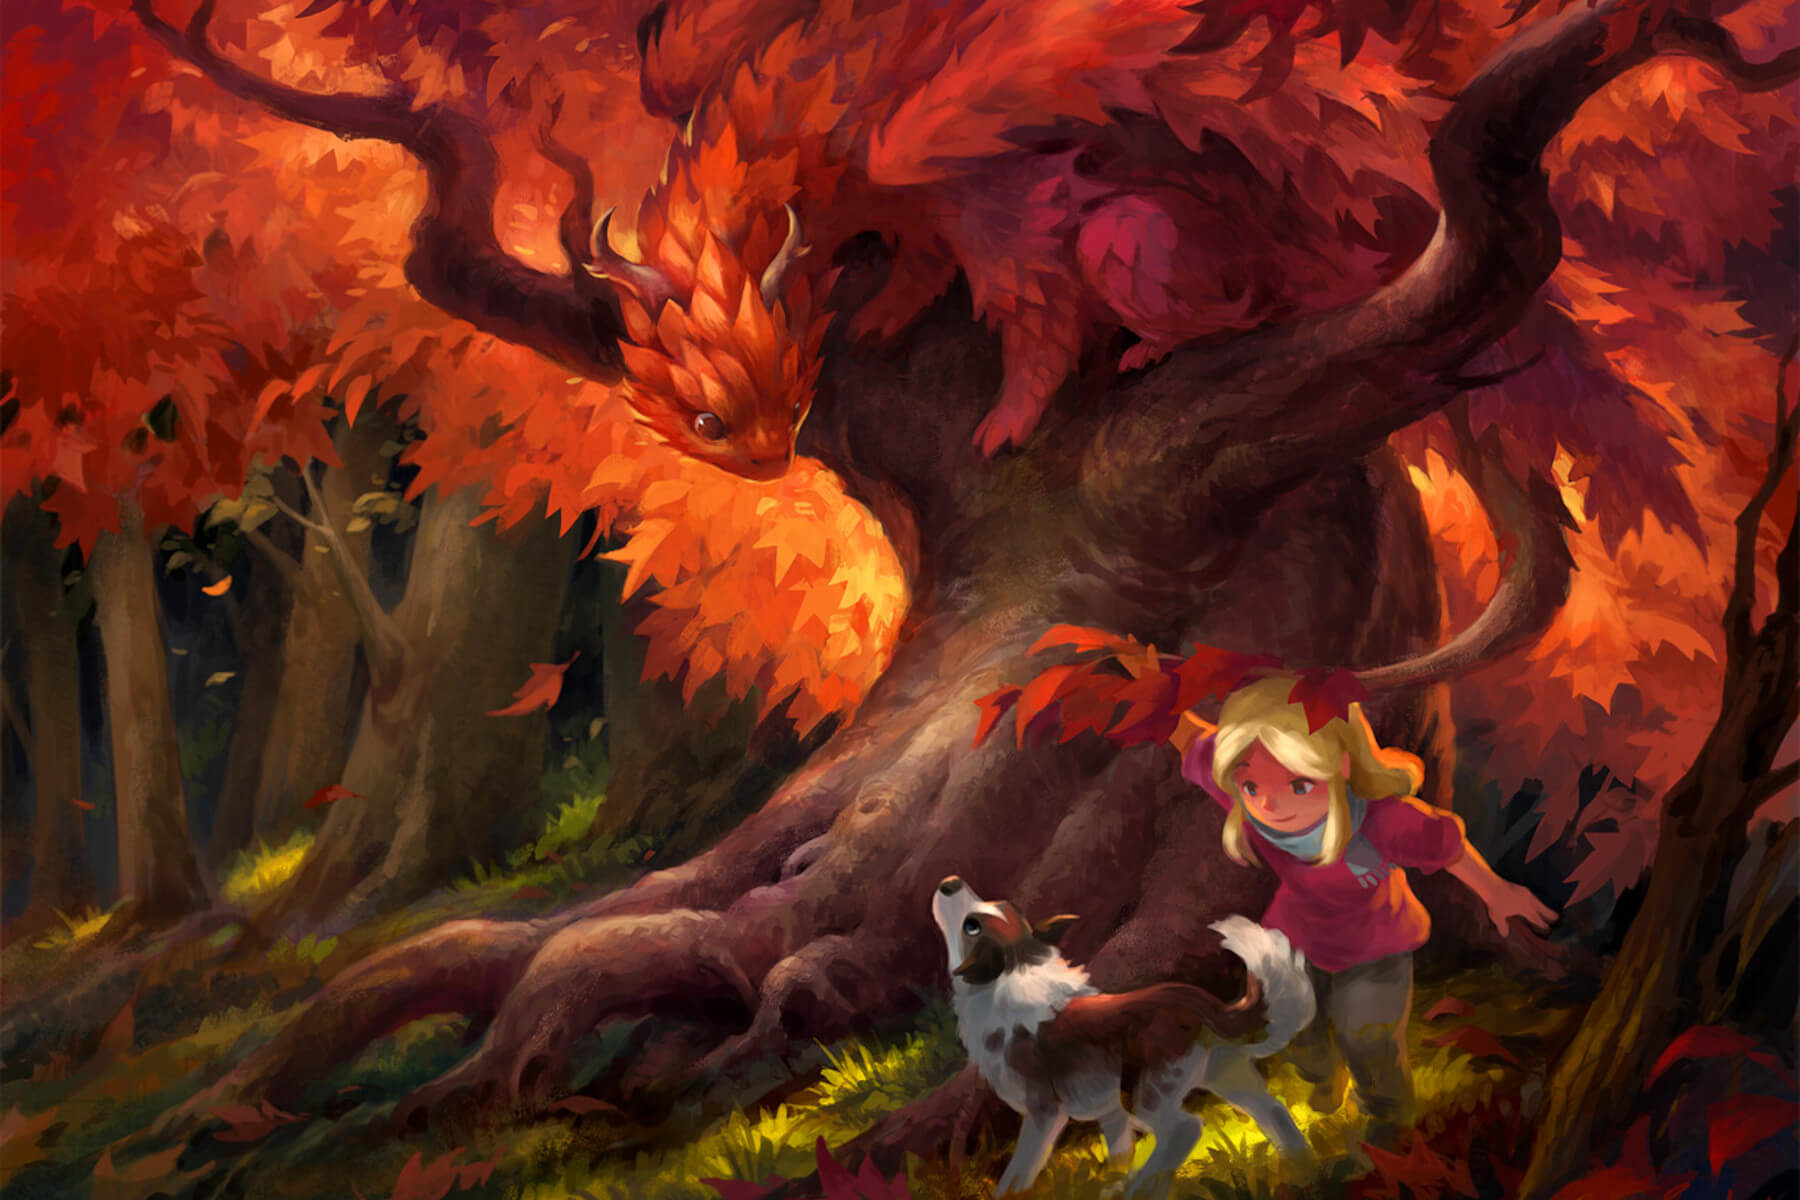 A girl and her dog walk through a forest watched from above by a small dragon, by Sandara Tang.